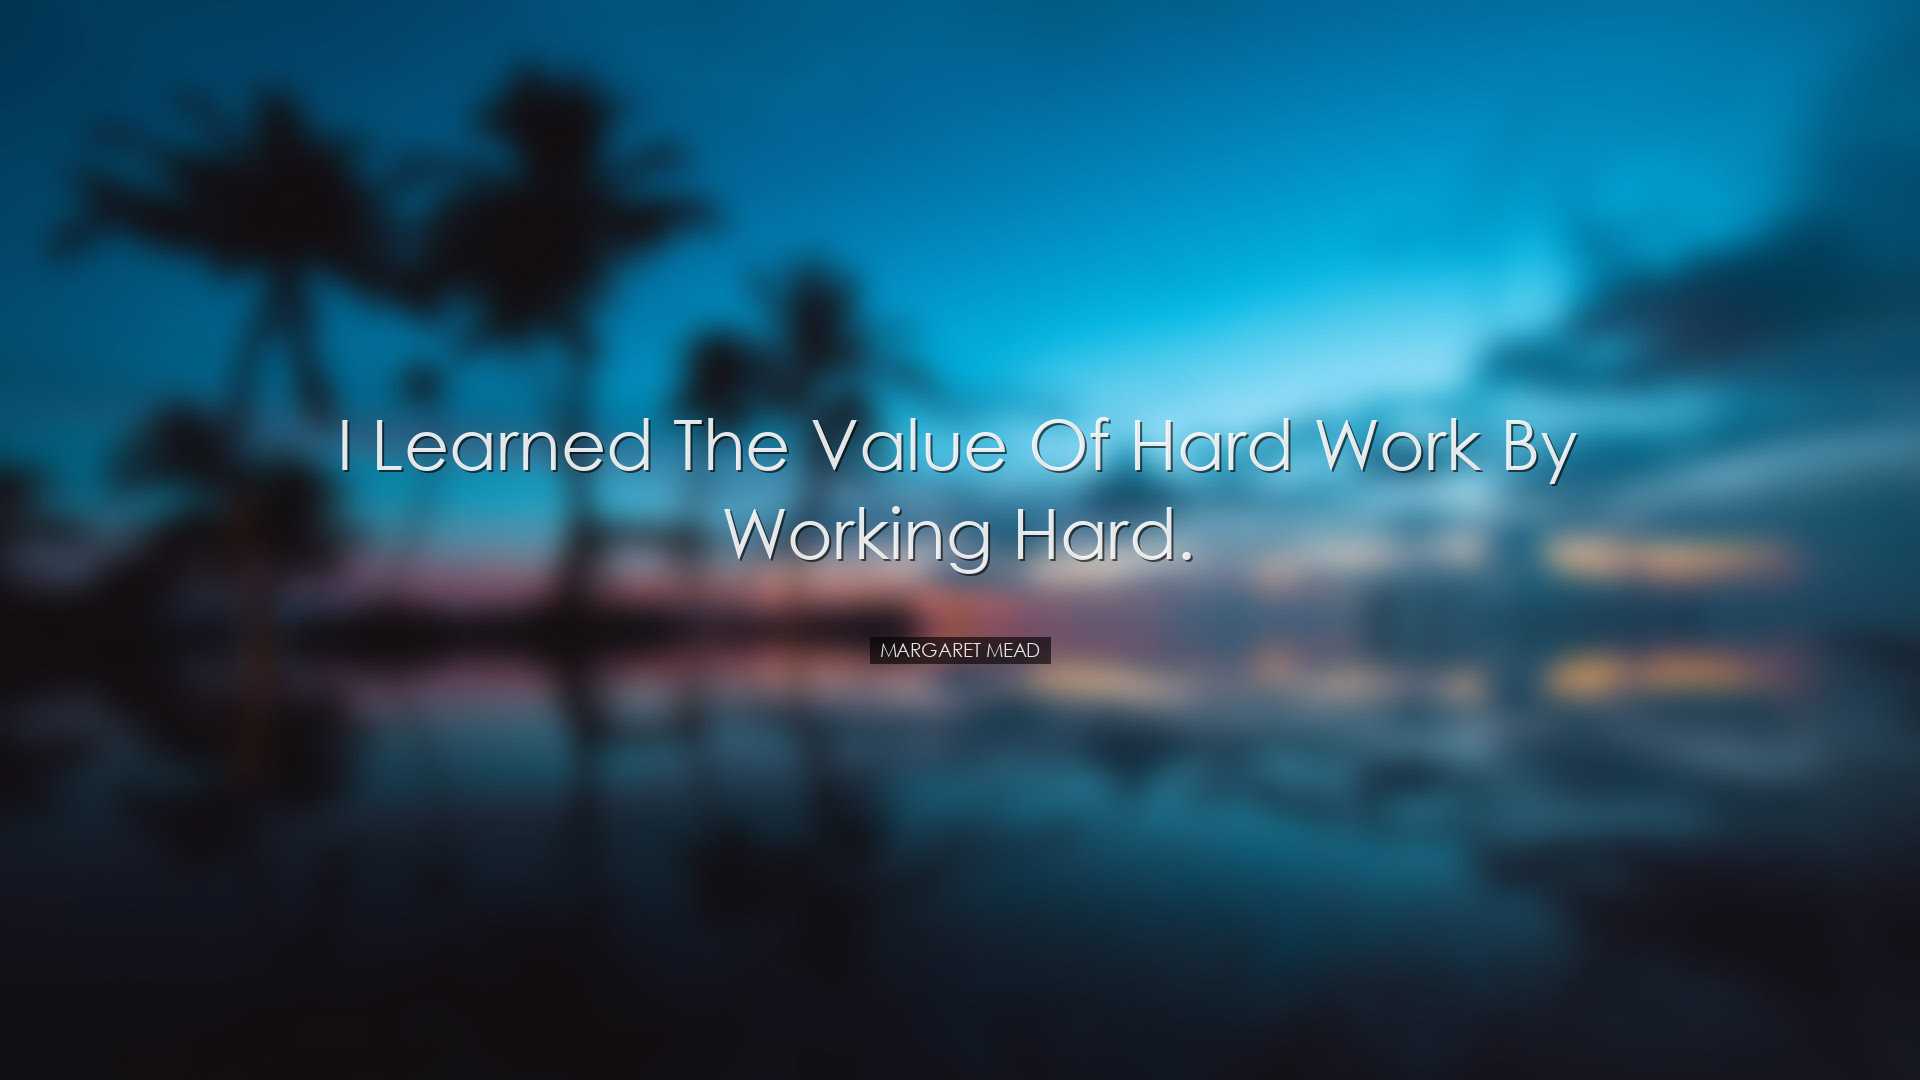 I learned the value of hard work by working hard. - Margaret Mead